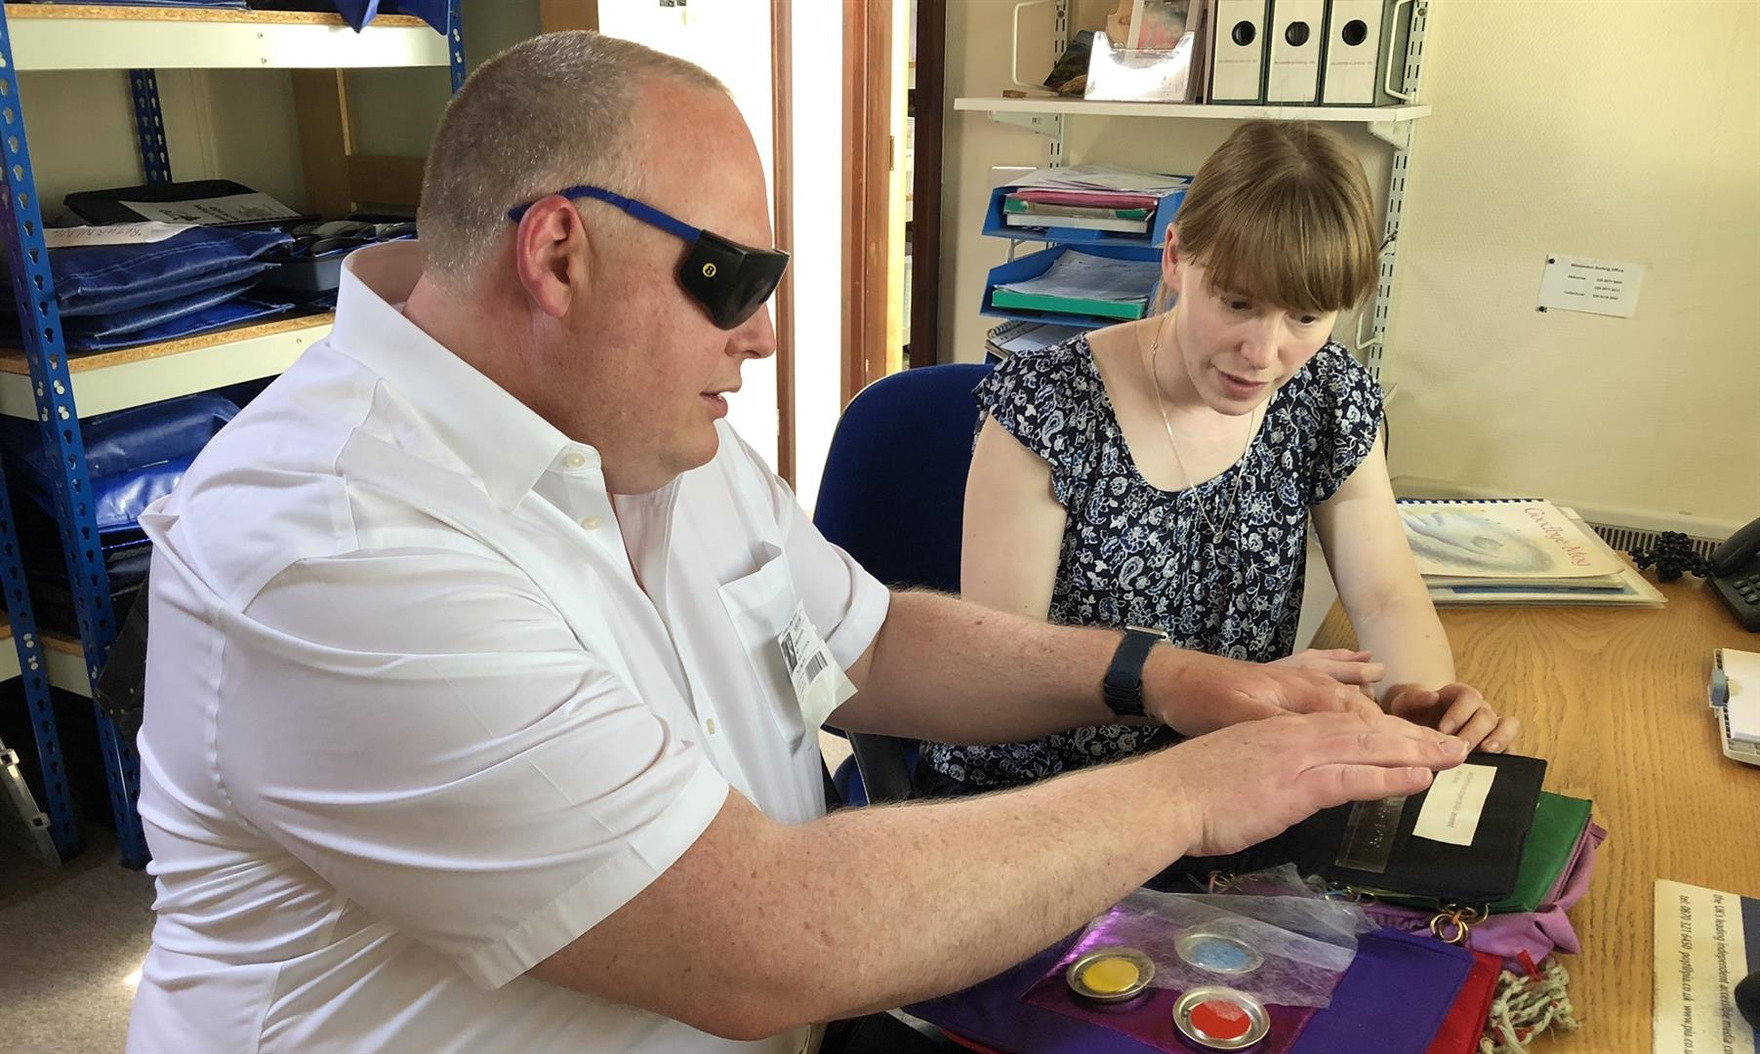 Visually impaired children get chance to read with help from London Masons